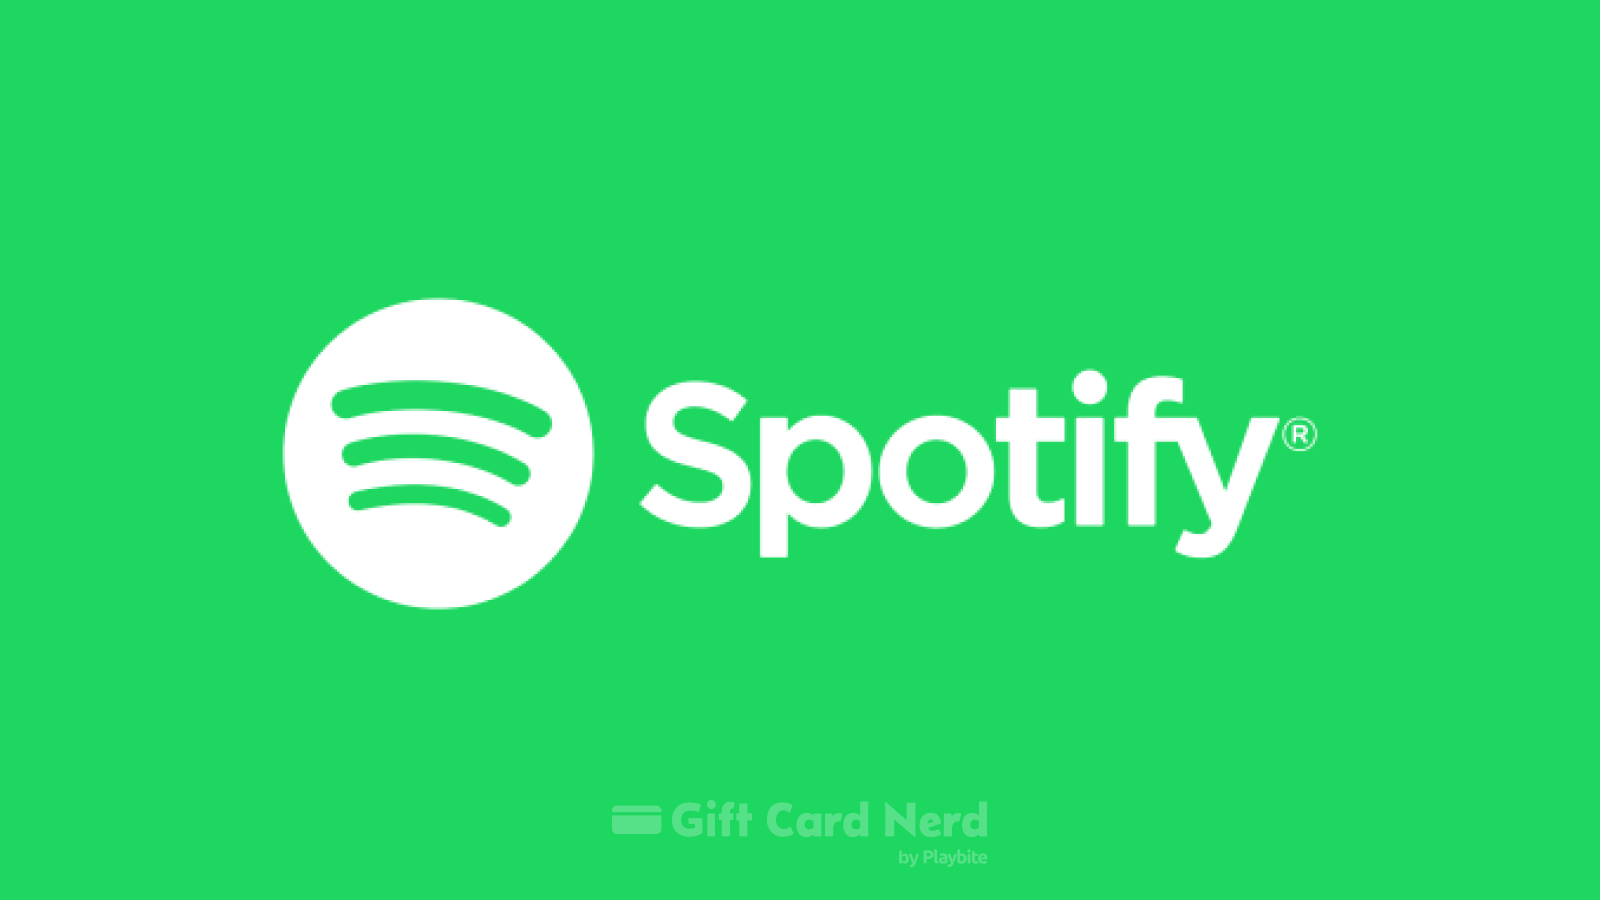 Does GameStop Sell Spotify Gift Cards?